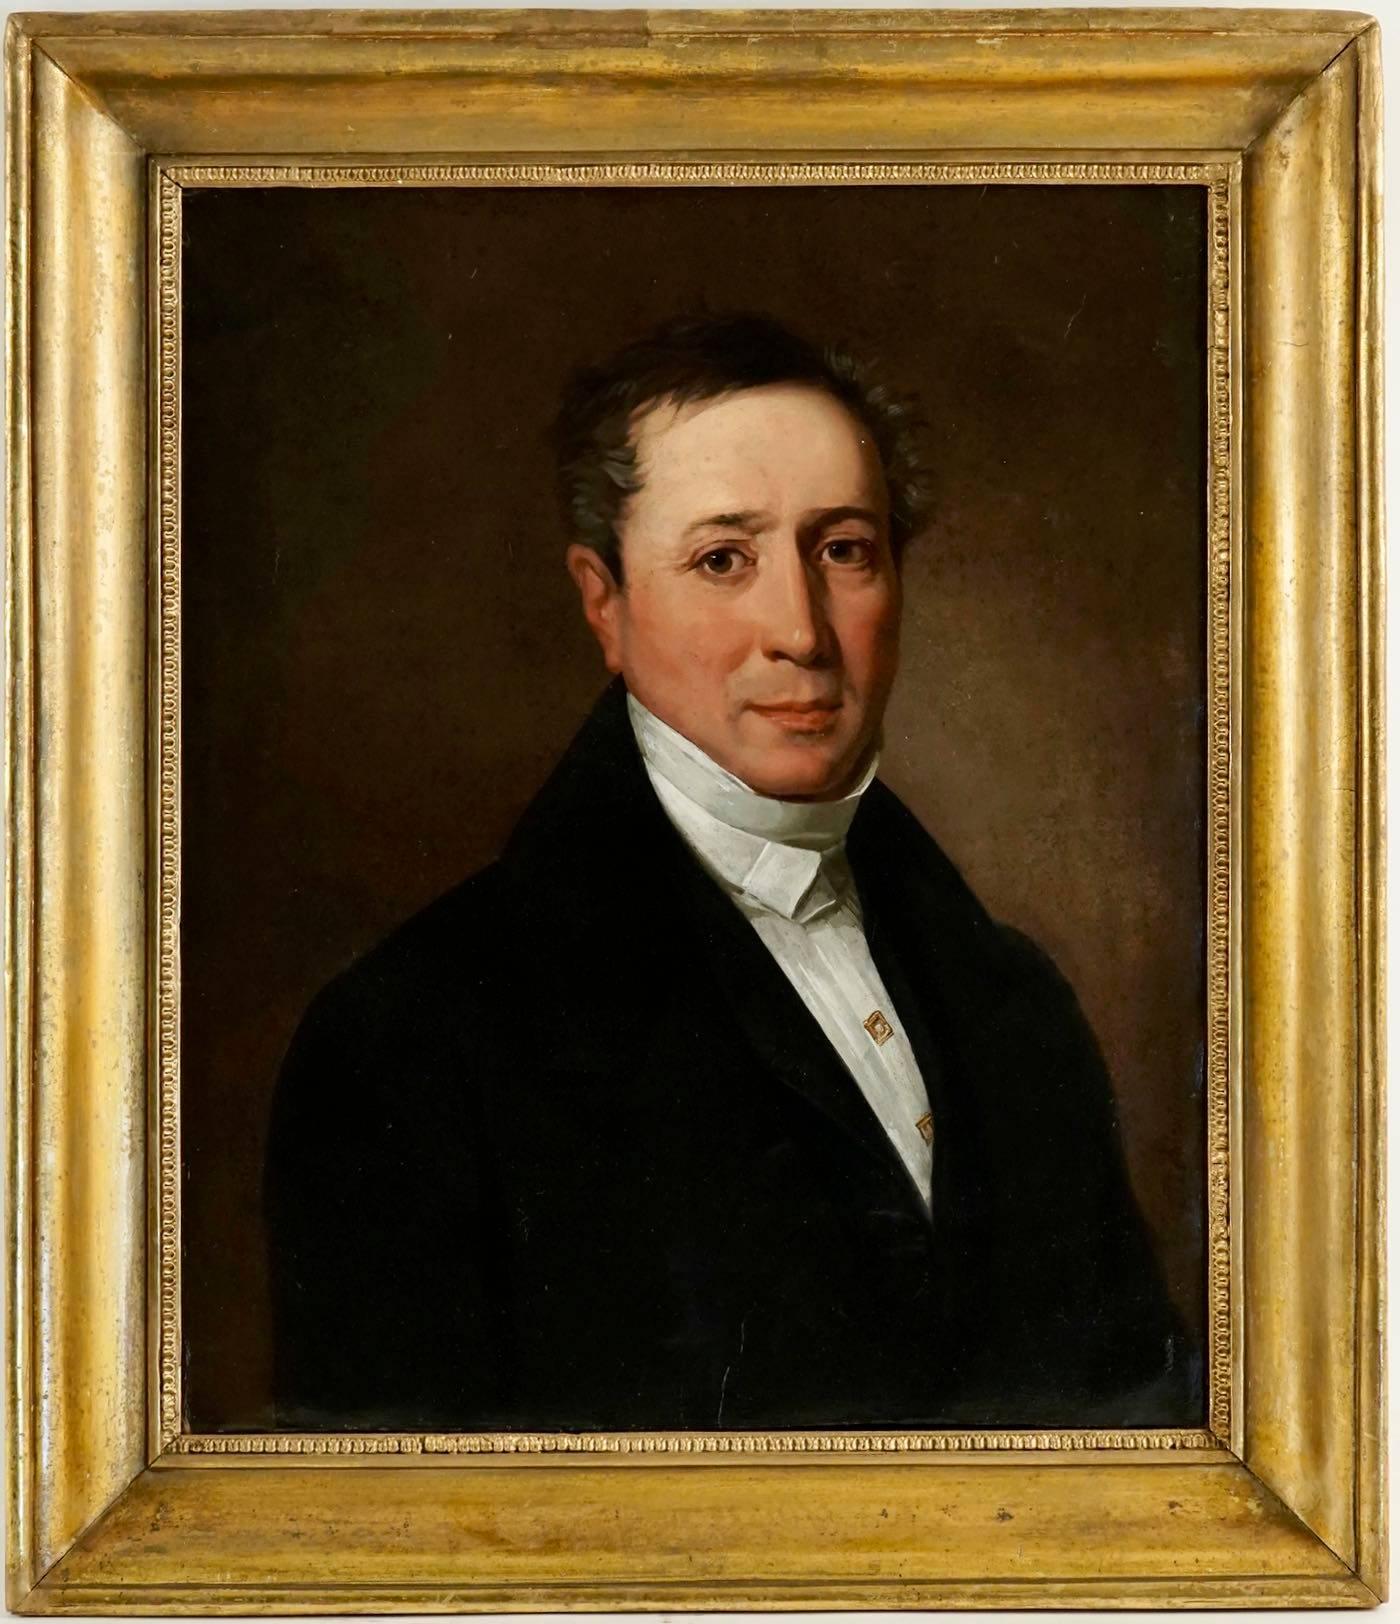 Mid-19th Century Portrait in Oil on Canvas of an Elegant Man from the 19th Century